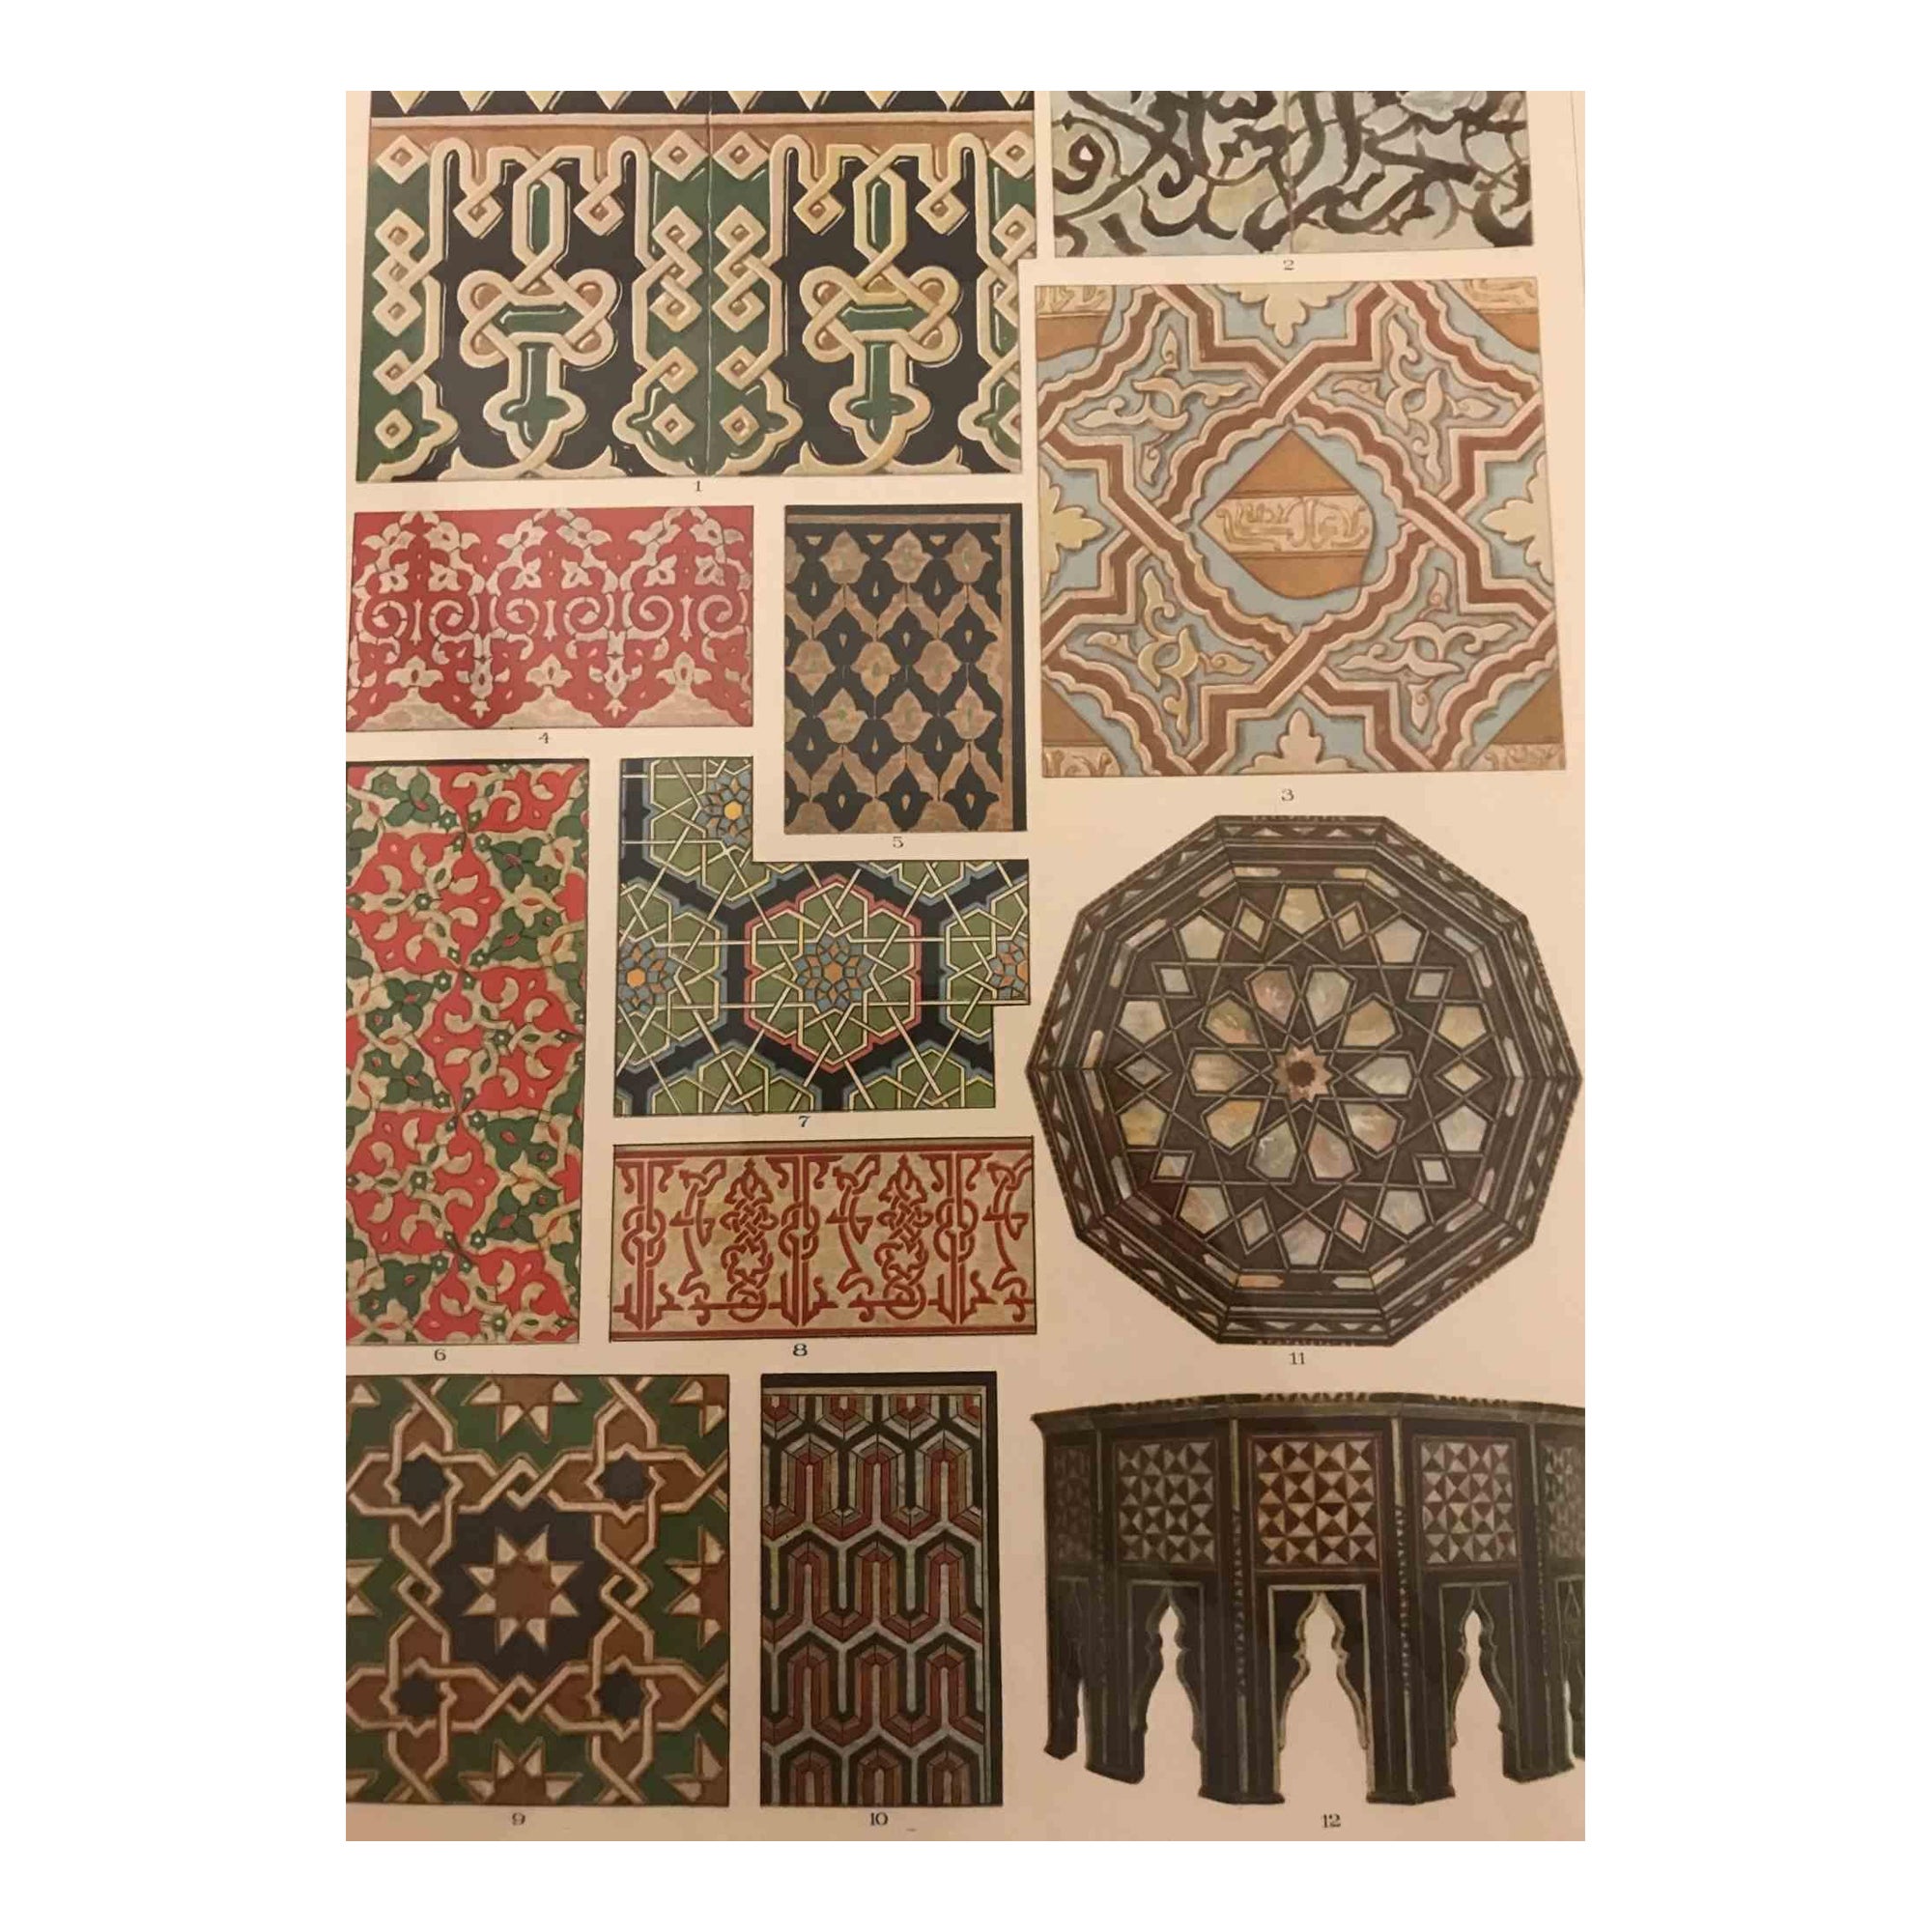 Decorative Motifs - Arabic Style is a print on ivory-colored paper realized by  A. Alessio in the  early 20th Century. Signed on the plate on the lower.

Vintage Chromolithograph.

Very good conditions.

The artwork represents Decorative motifs